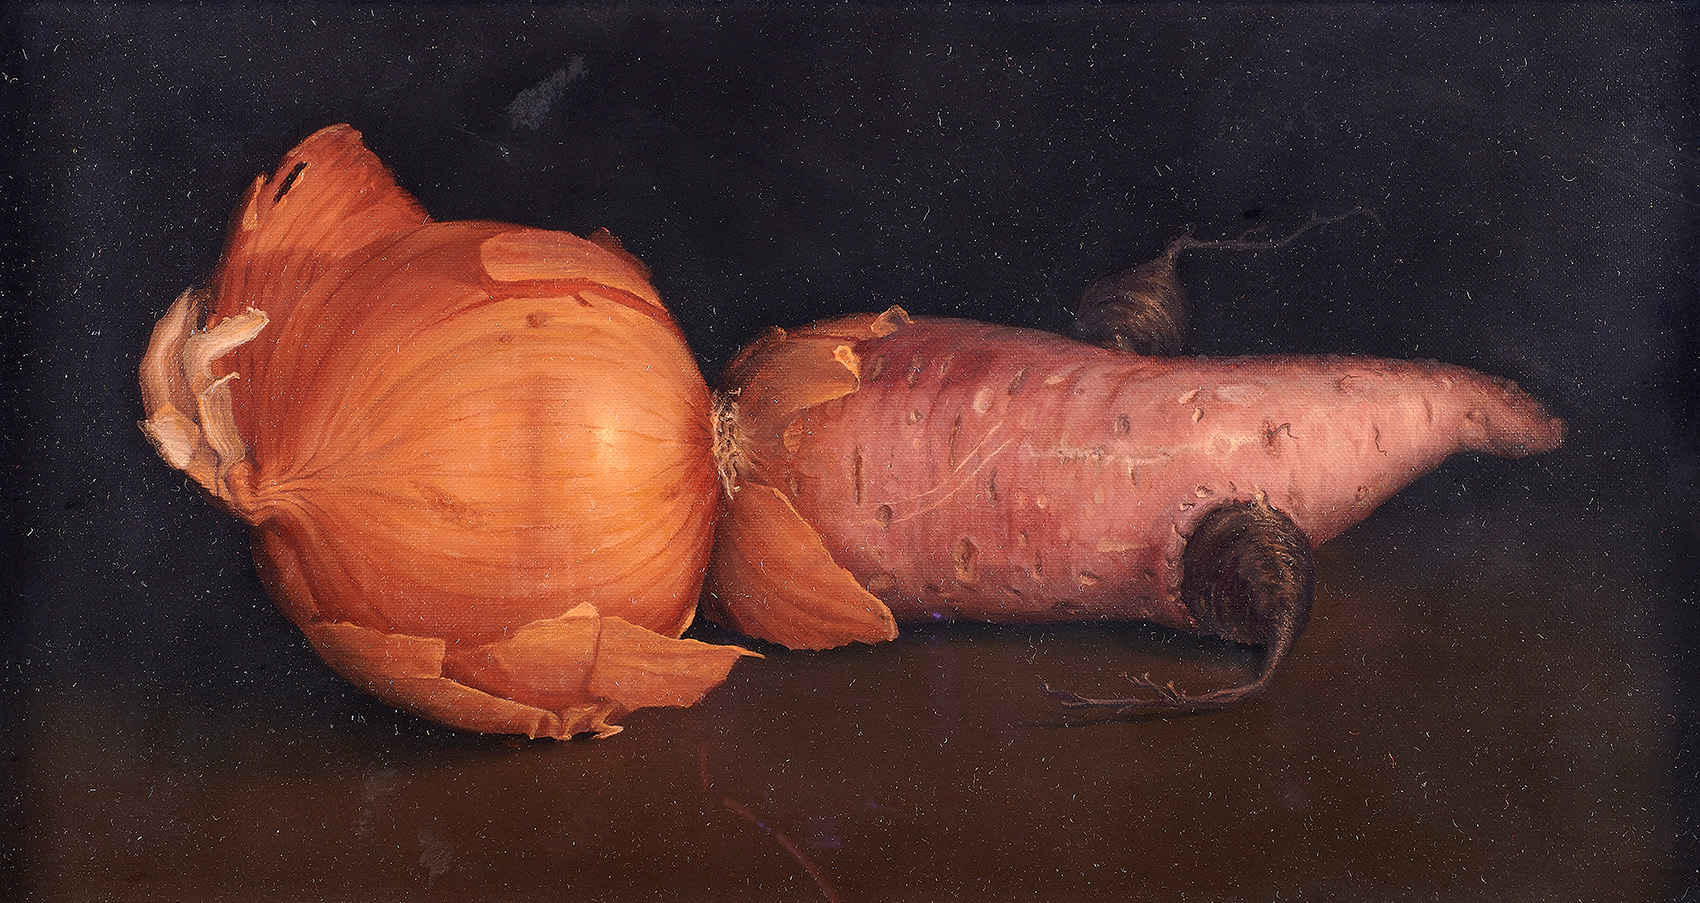 Derrick Guild (Scottish, b. 1963), <em>Onion, Sweet Potato, Beet</em>, 2004, oil on linen, 12″ x 22″. Exhibited: Allan Stone Gallery (New York, NY) <em>Derrick Guild: Pre-Ascension</em>, March 8–April 28, 2007. Provenance: Acquired by descent from the Estate of Allan Stone.